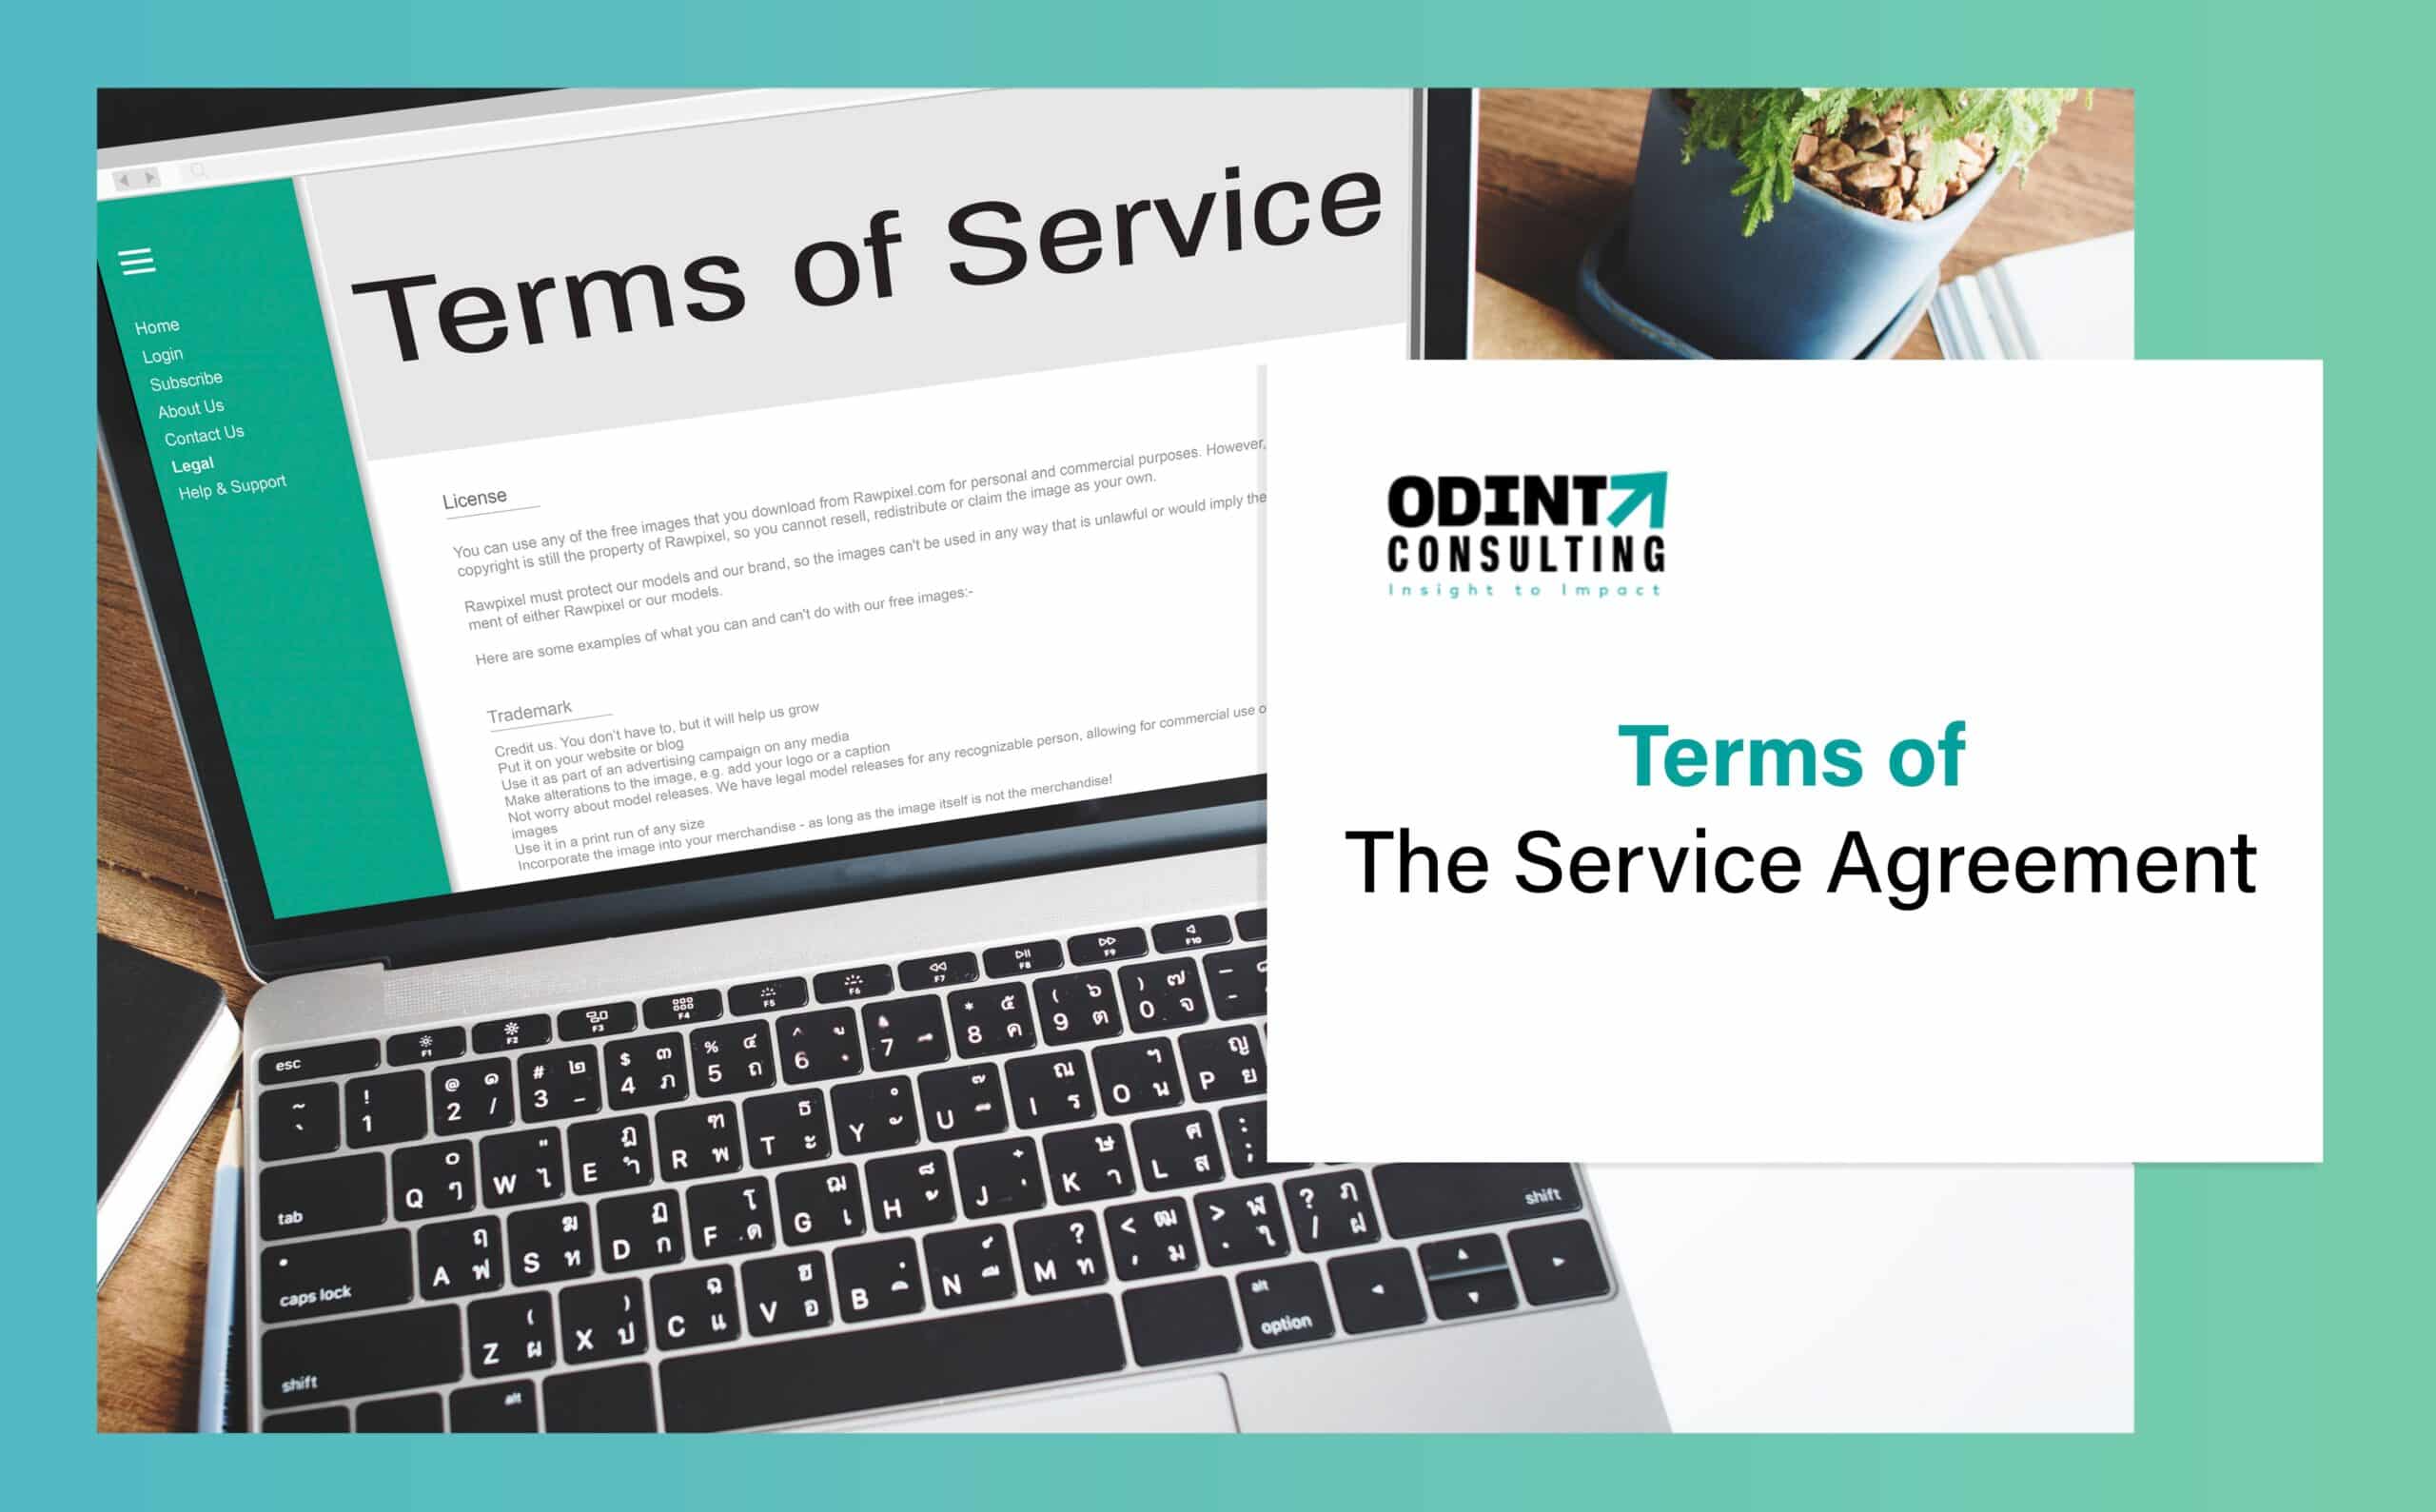 Terms Of the Service Agreement: Clauses, Steps & Problems